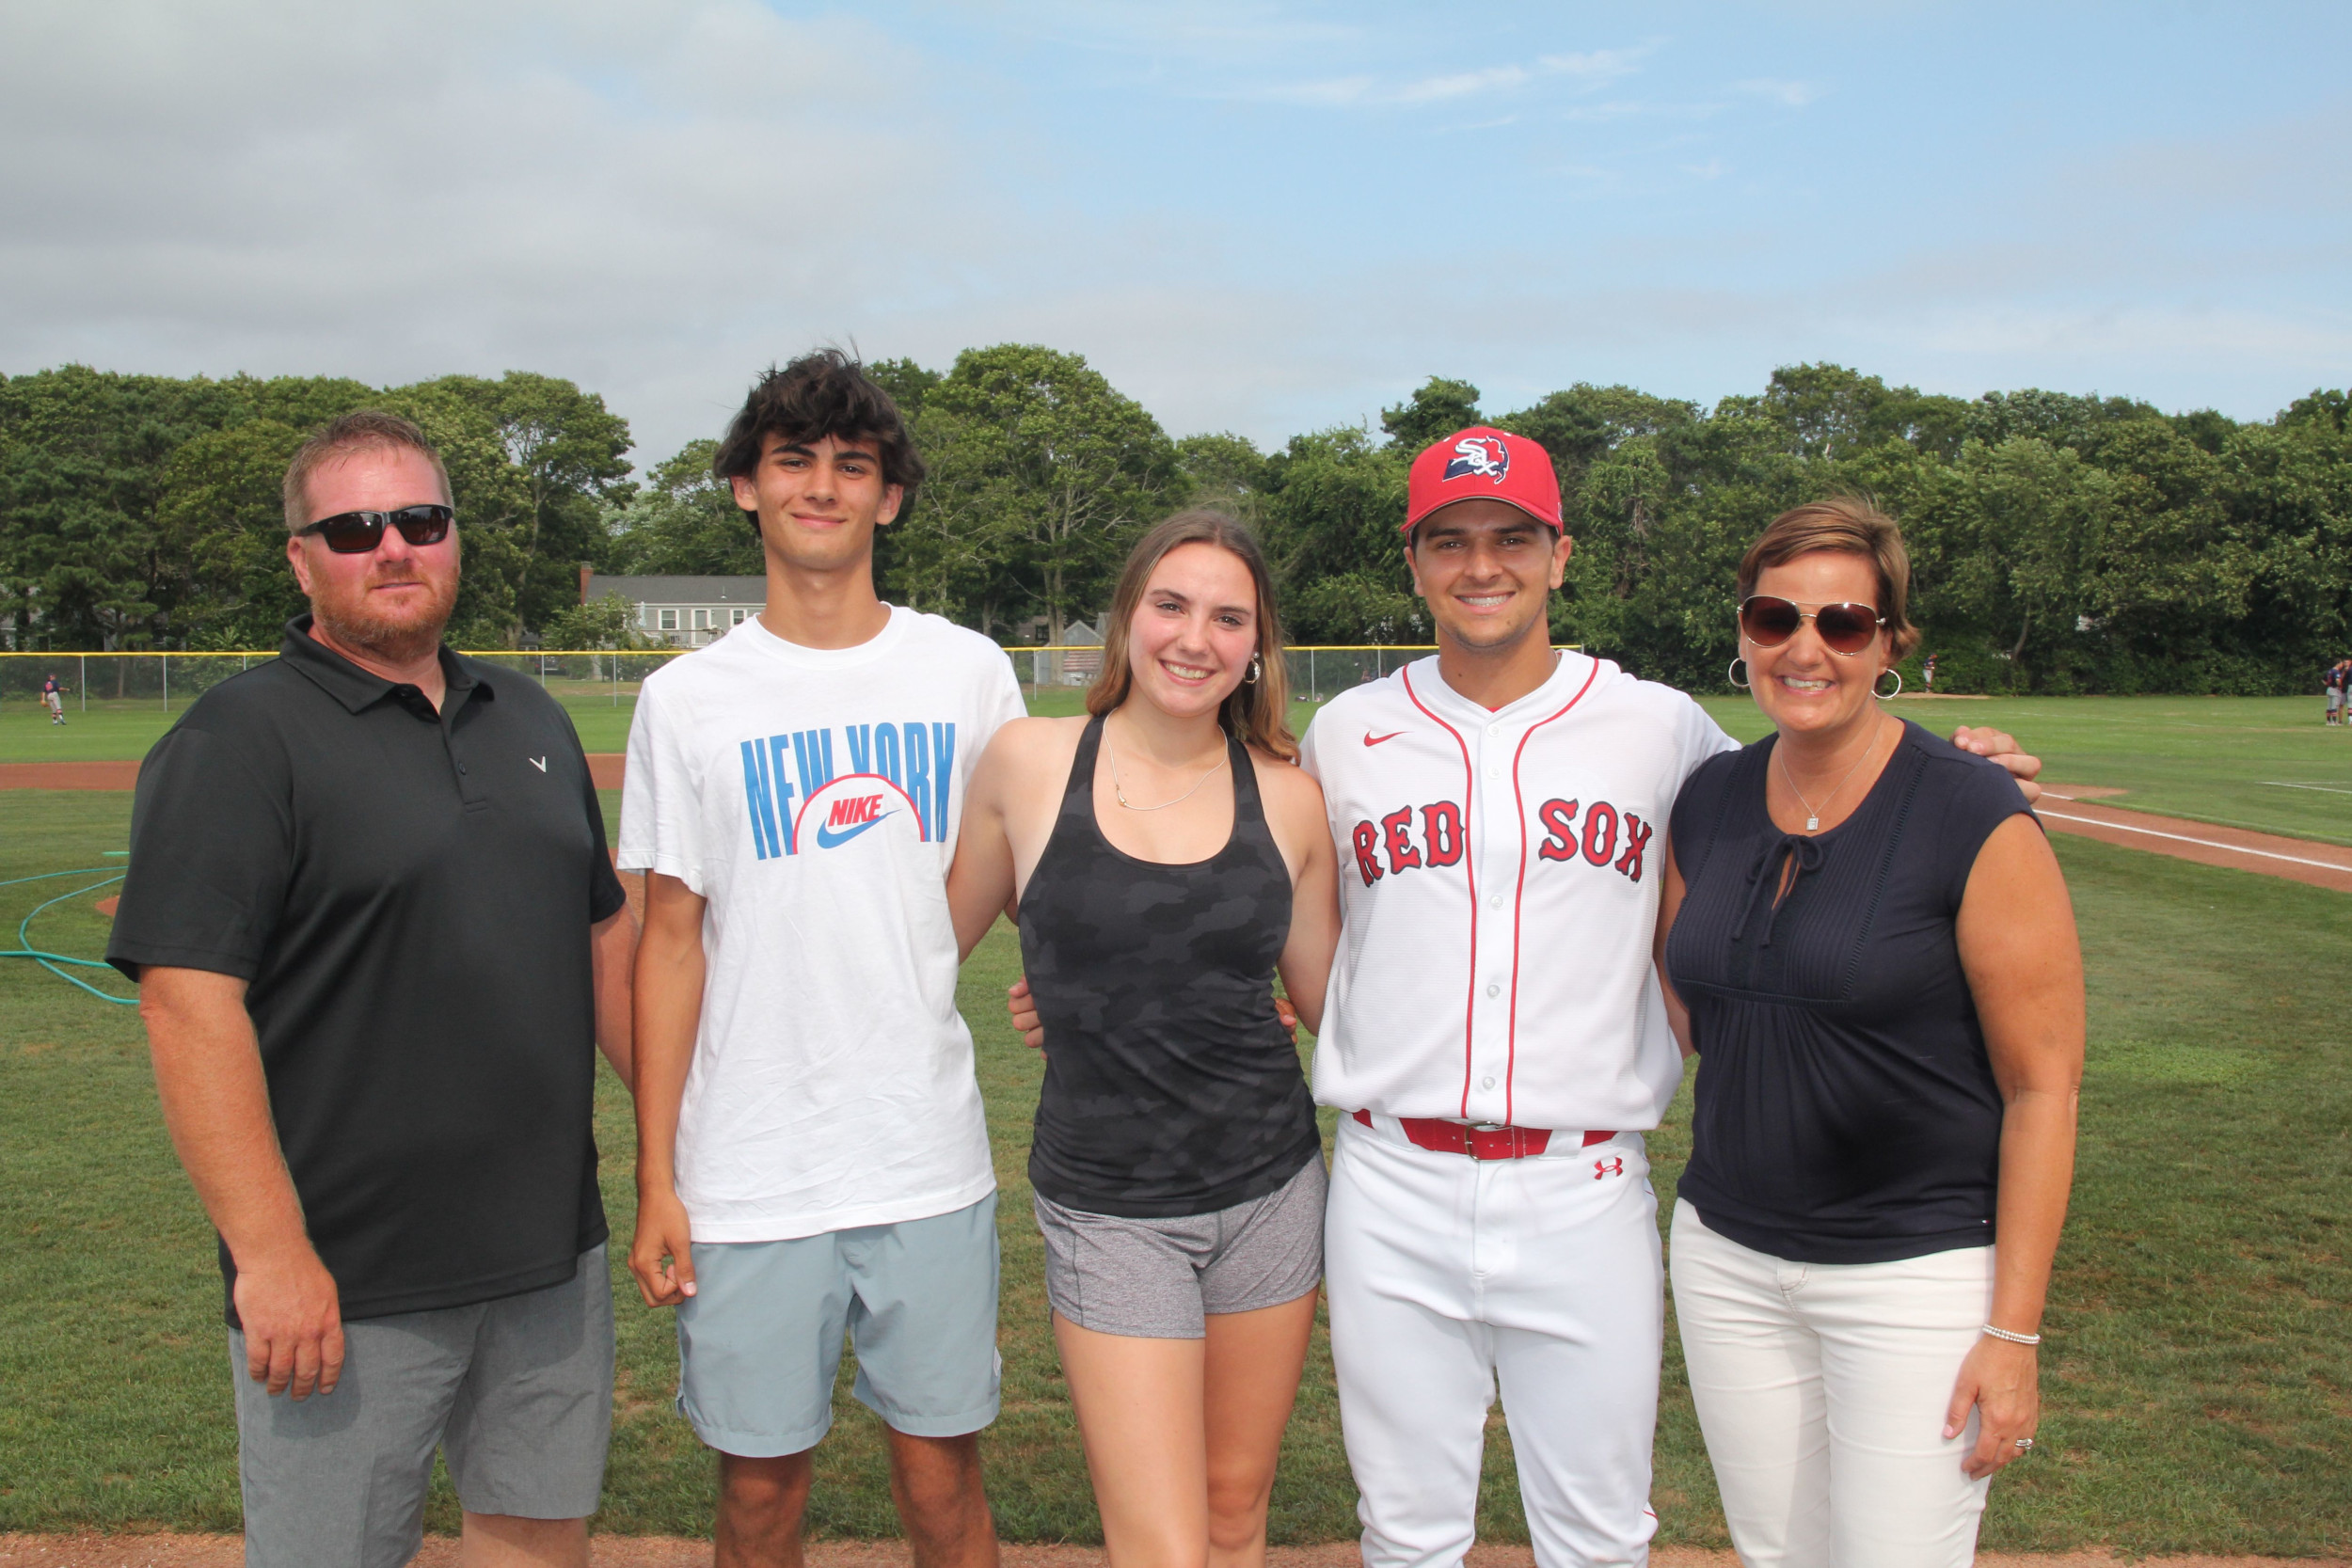 YD Red Sox players and host family